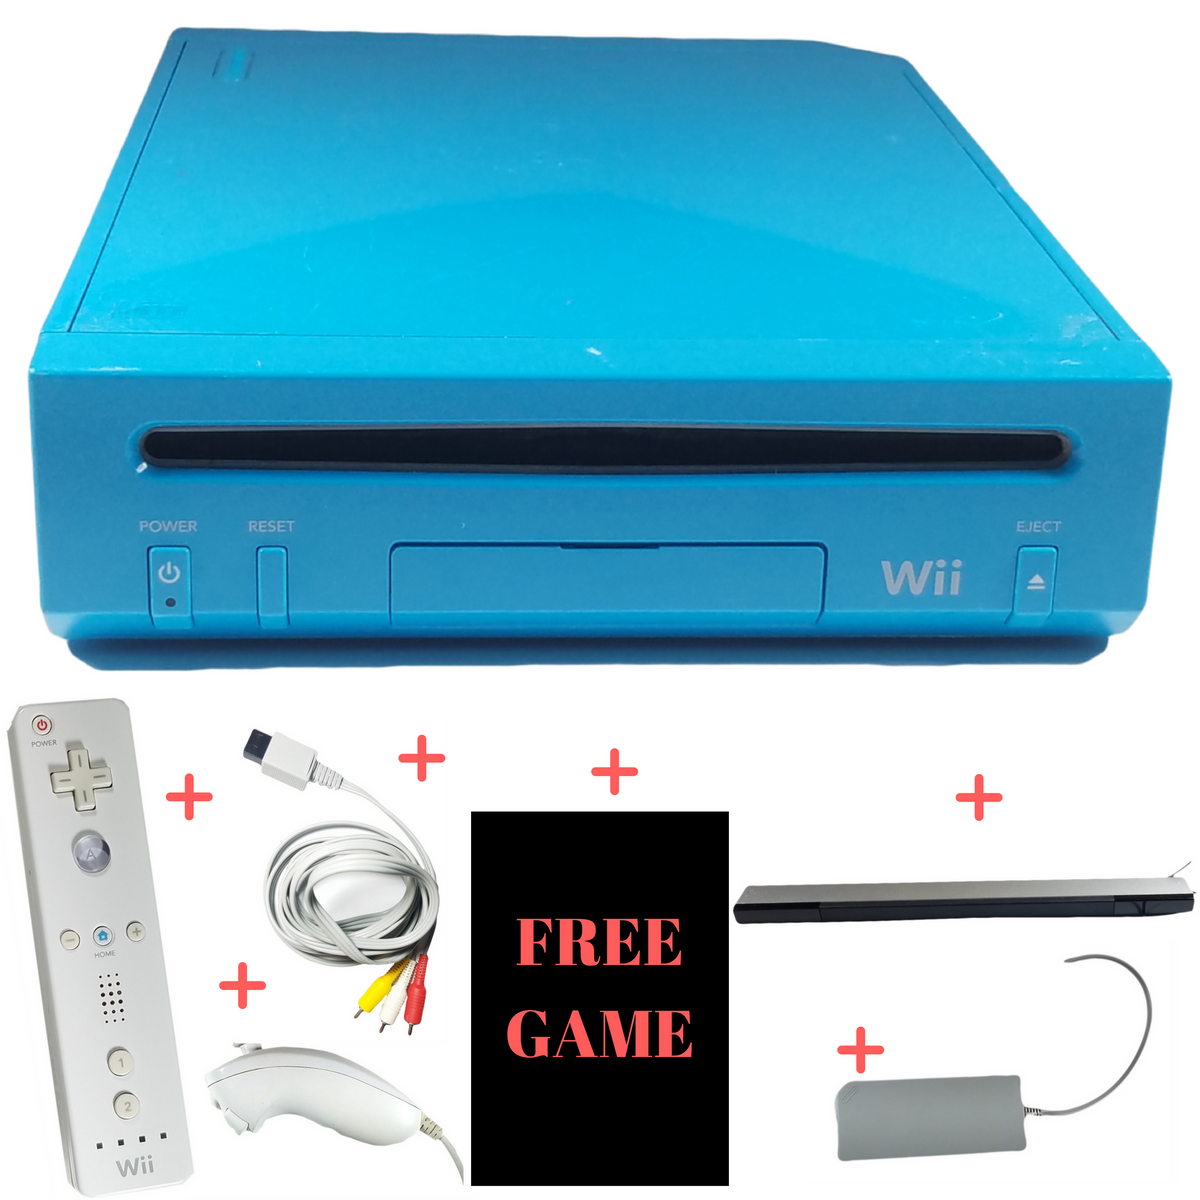 Nintendo Wii Limited Edition Blue Video Game Console Home System RVL-101